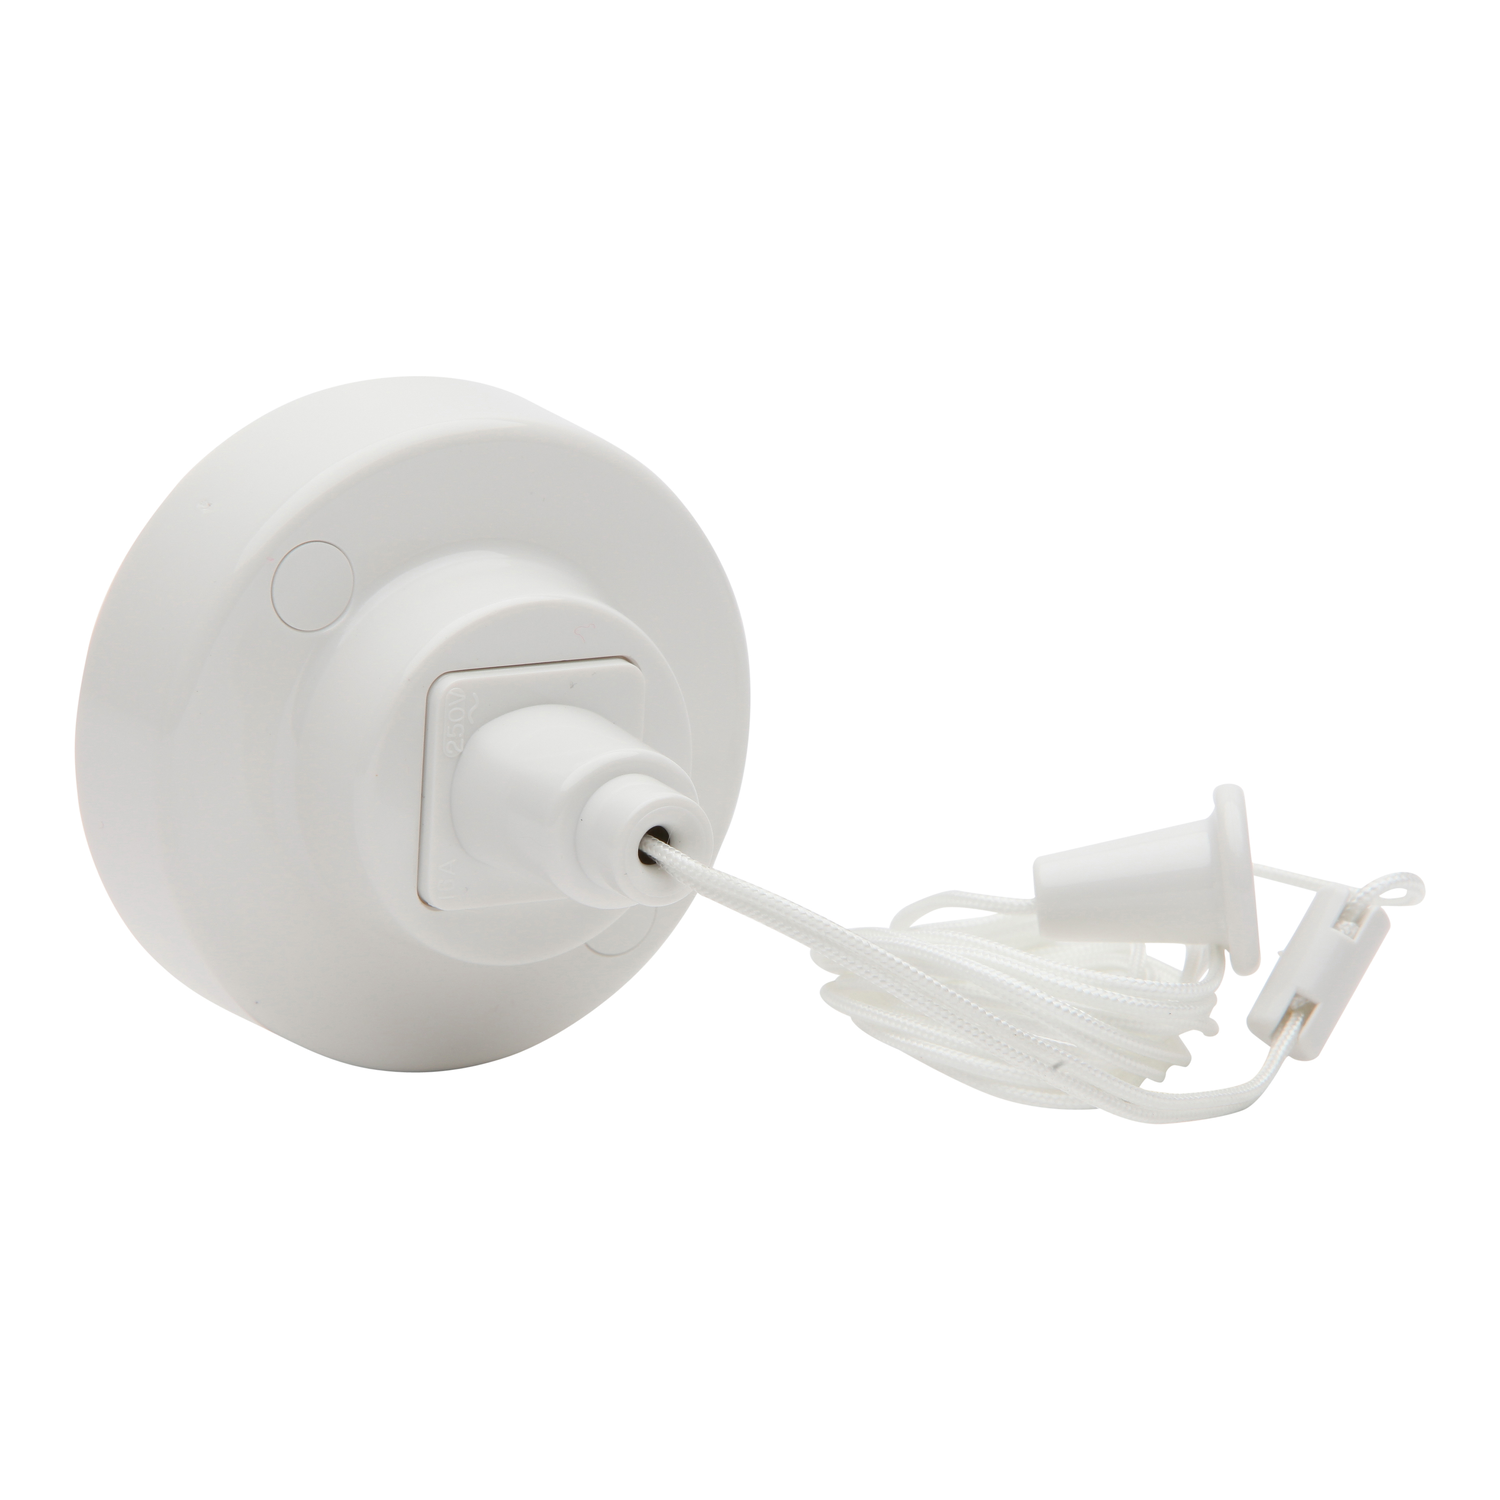 2-Way Pull Cord Switch; 16A, 250V, White